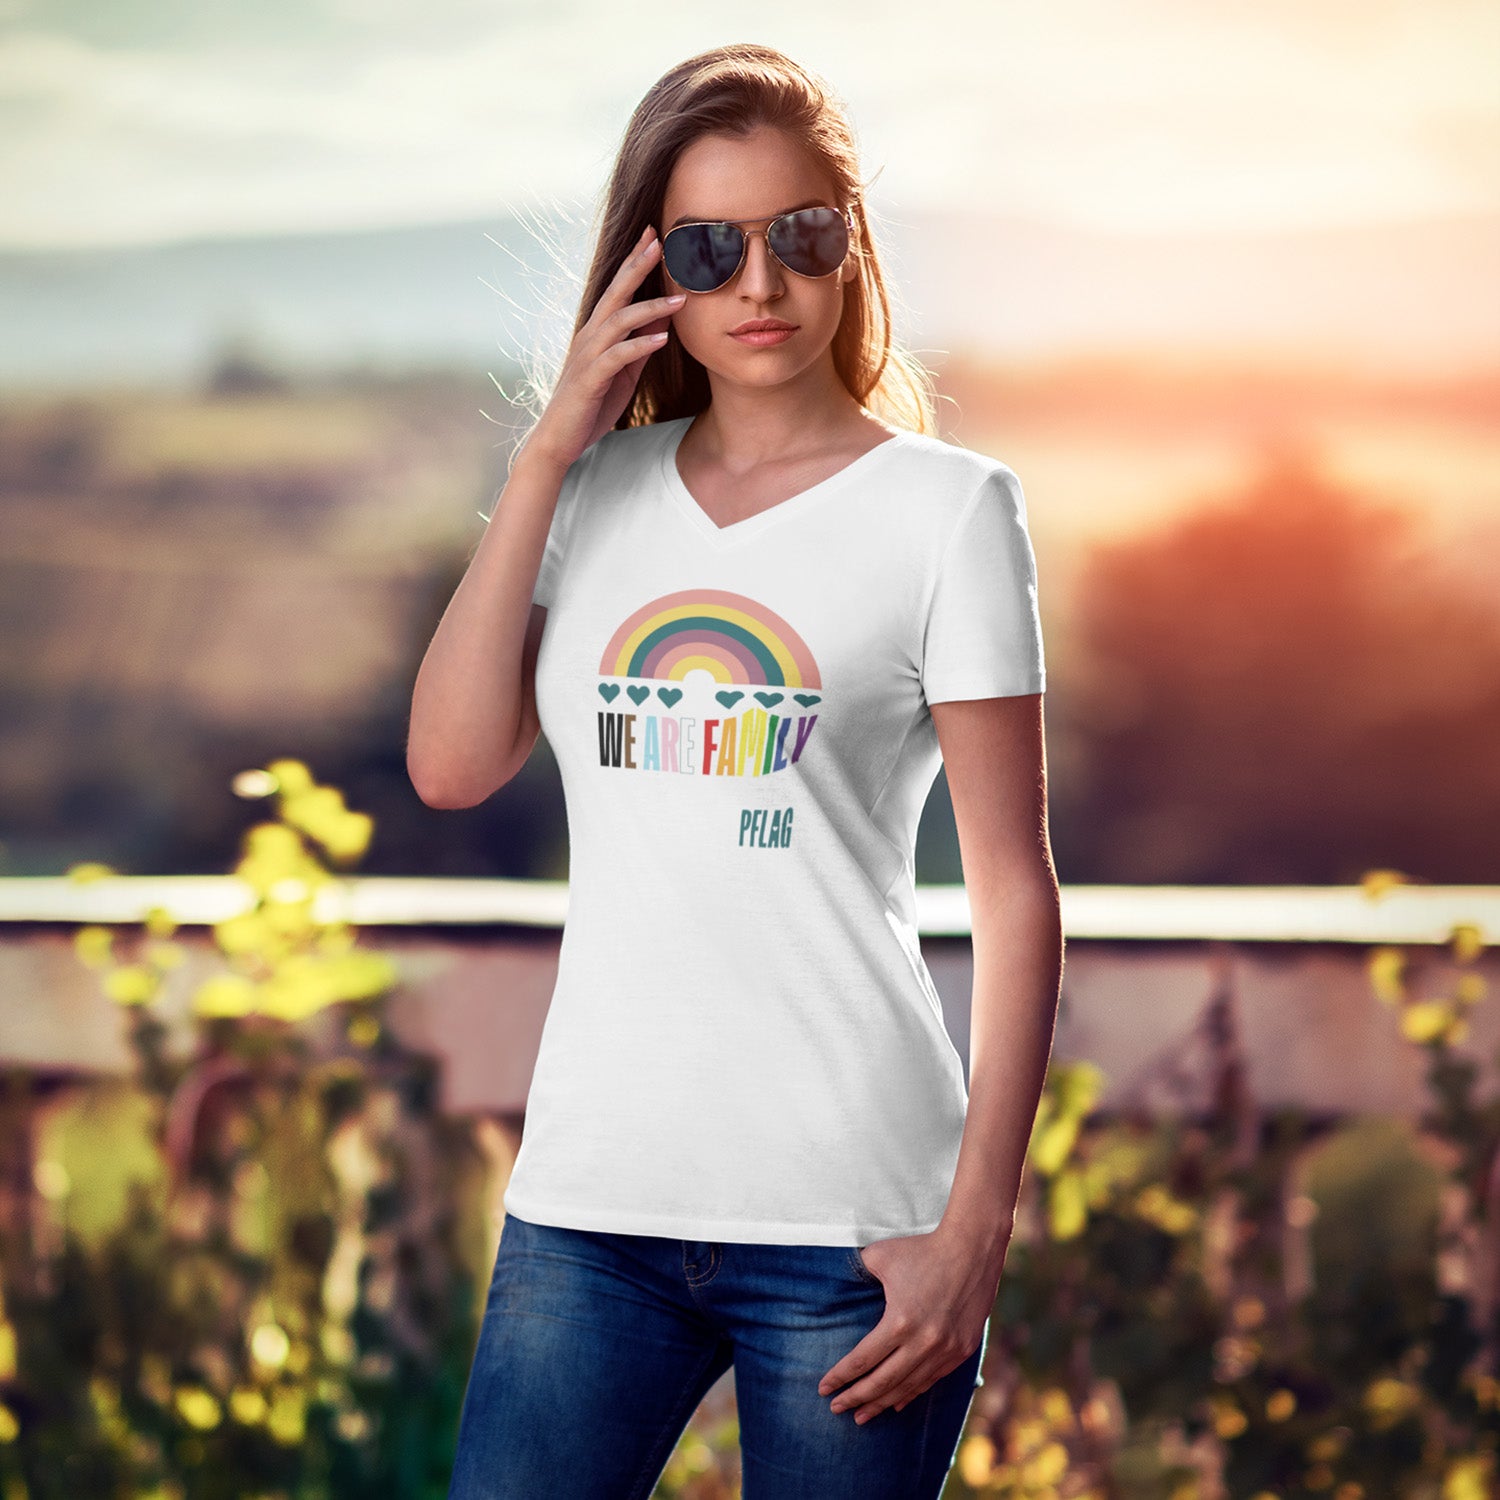 We Are Family - Fitted-Cut V-Neck Short Sleeve T-Shirt